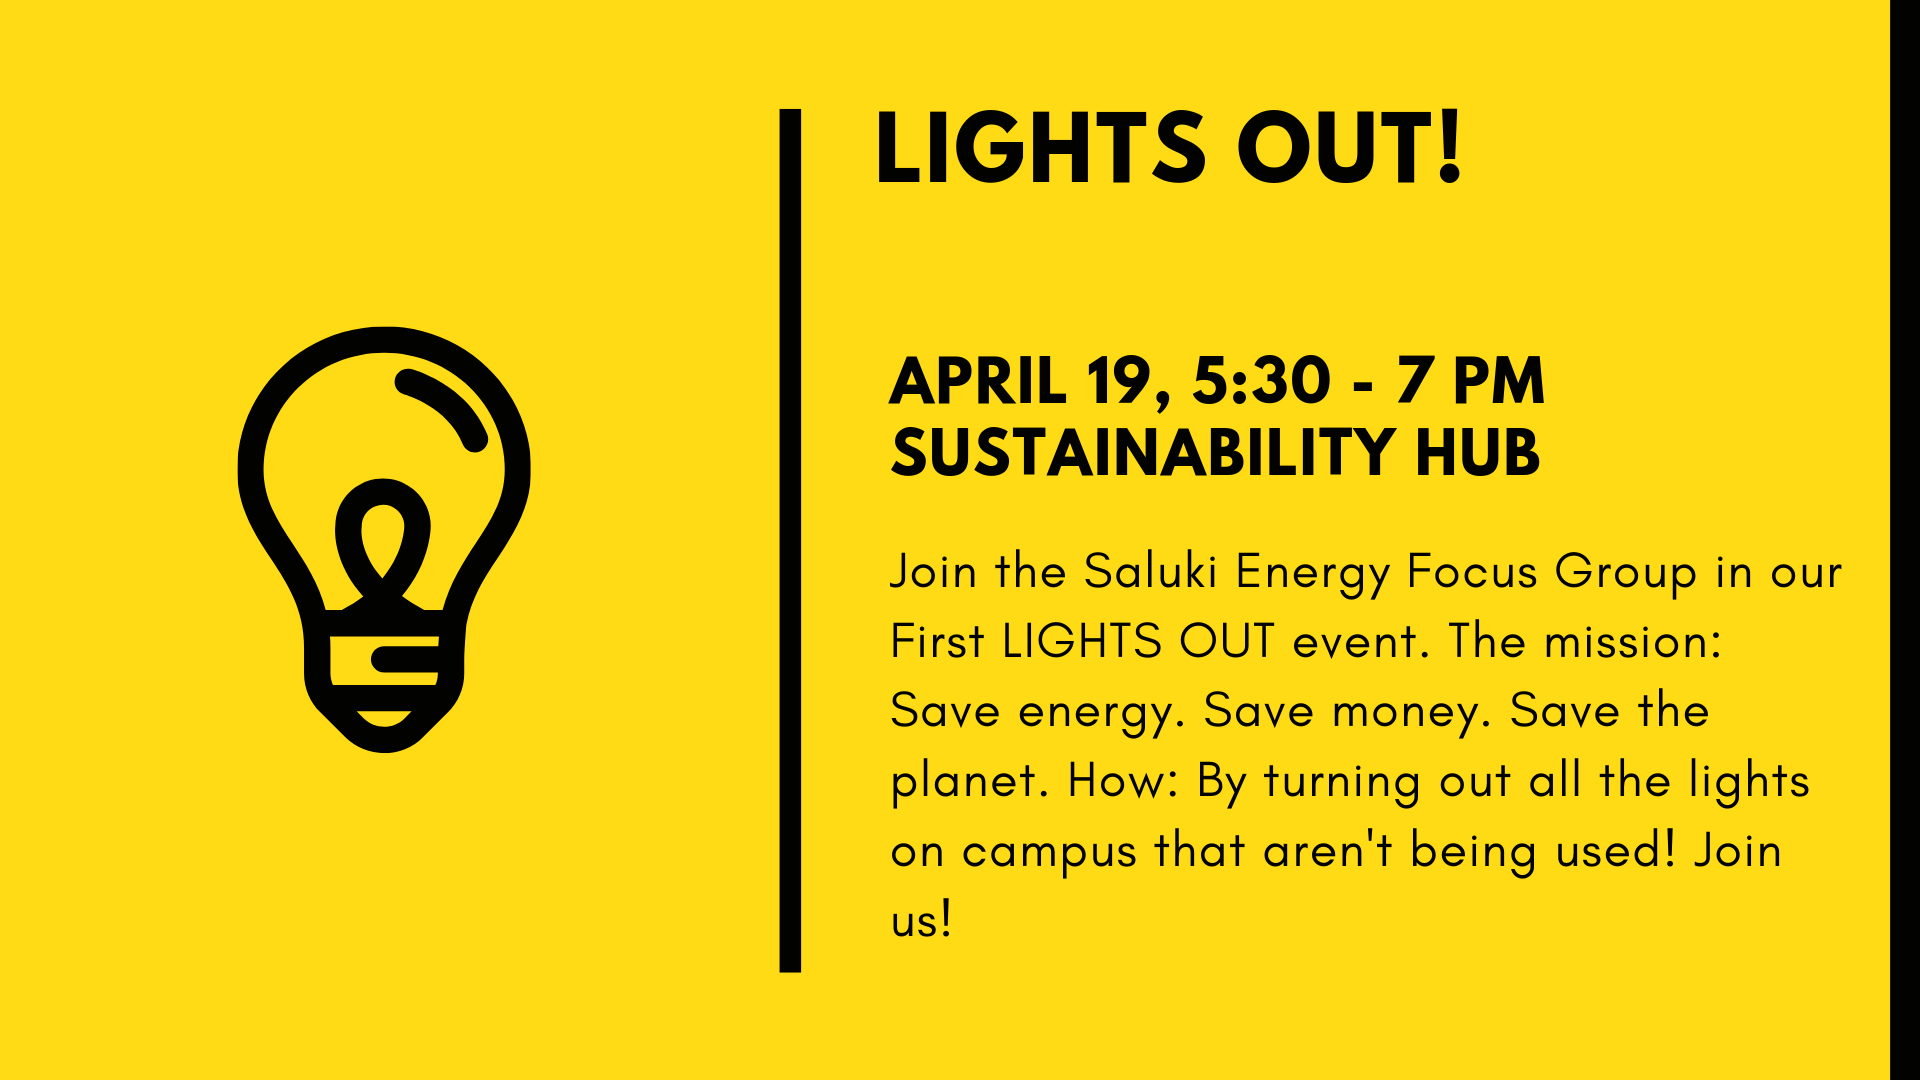 Lights out! April 19, 5:30 - 7 pm Sustainability hub, Join the saluki energy focus gorup in our first LiGHTS OUT event. This mission: Save energy. Save money. Save the planet. How: By turning out all the lights on campus that aren't being used! Join us!